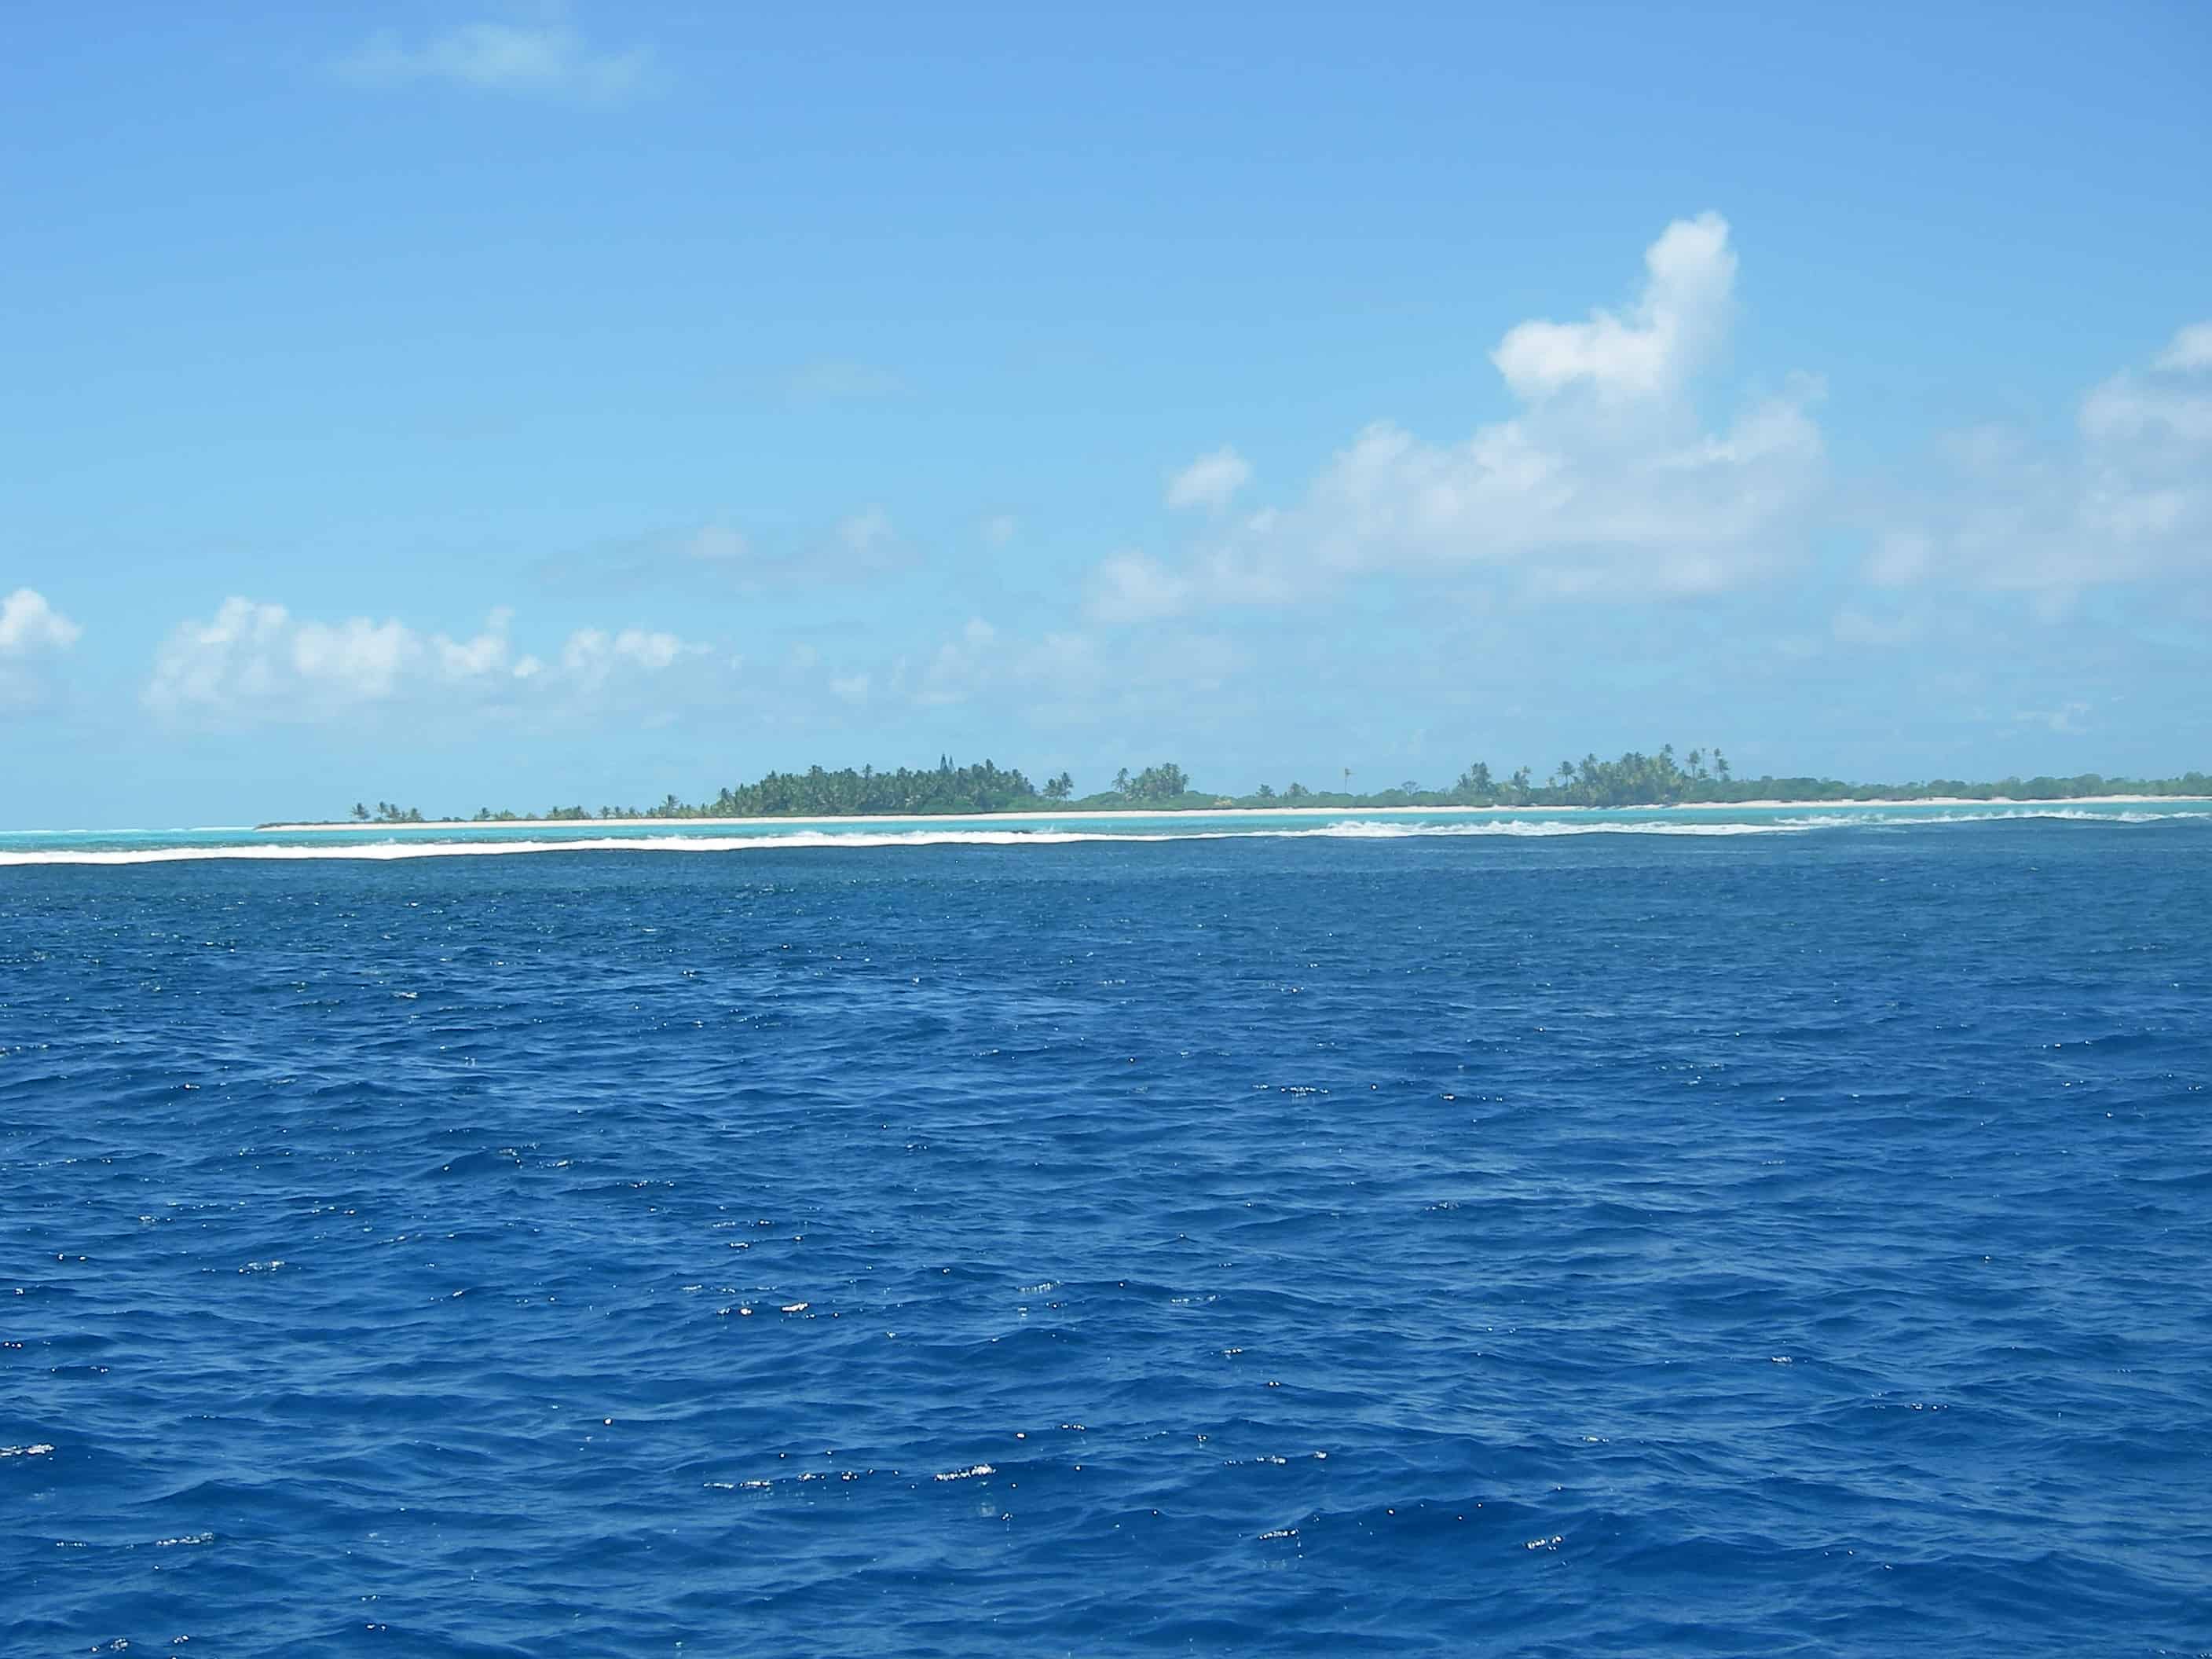 Oeno Island, one of the two low atolls in the group. Copyright: Dr Mike Pienkowski